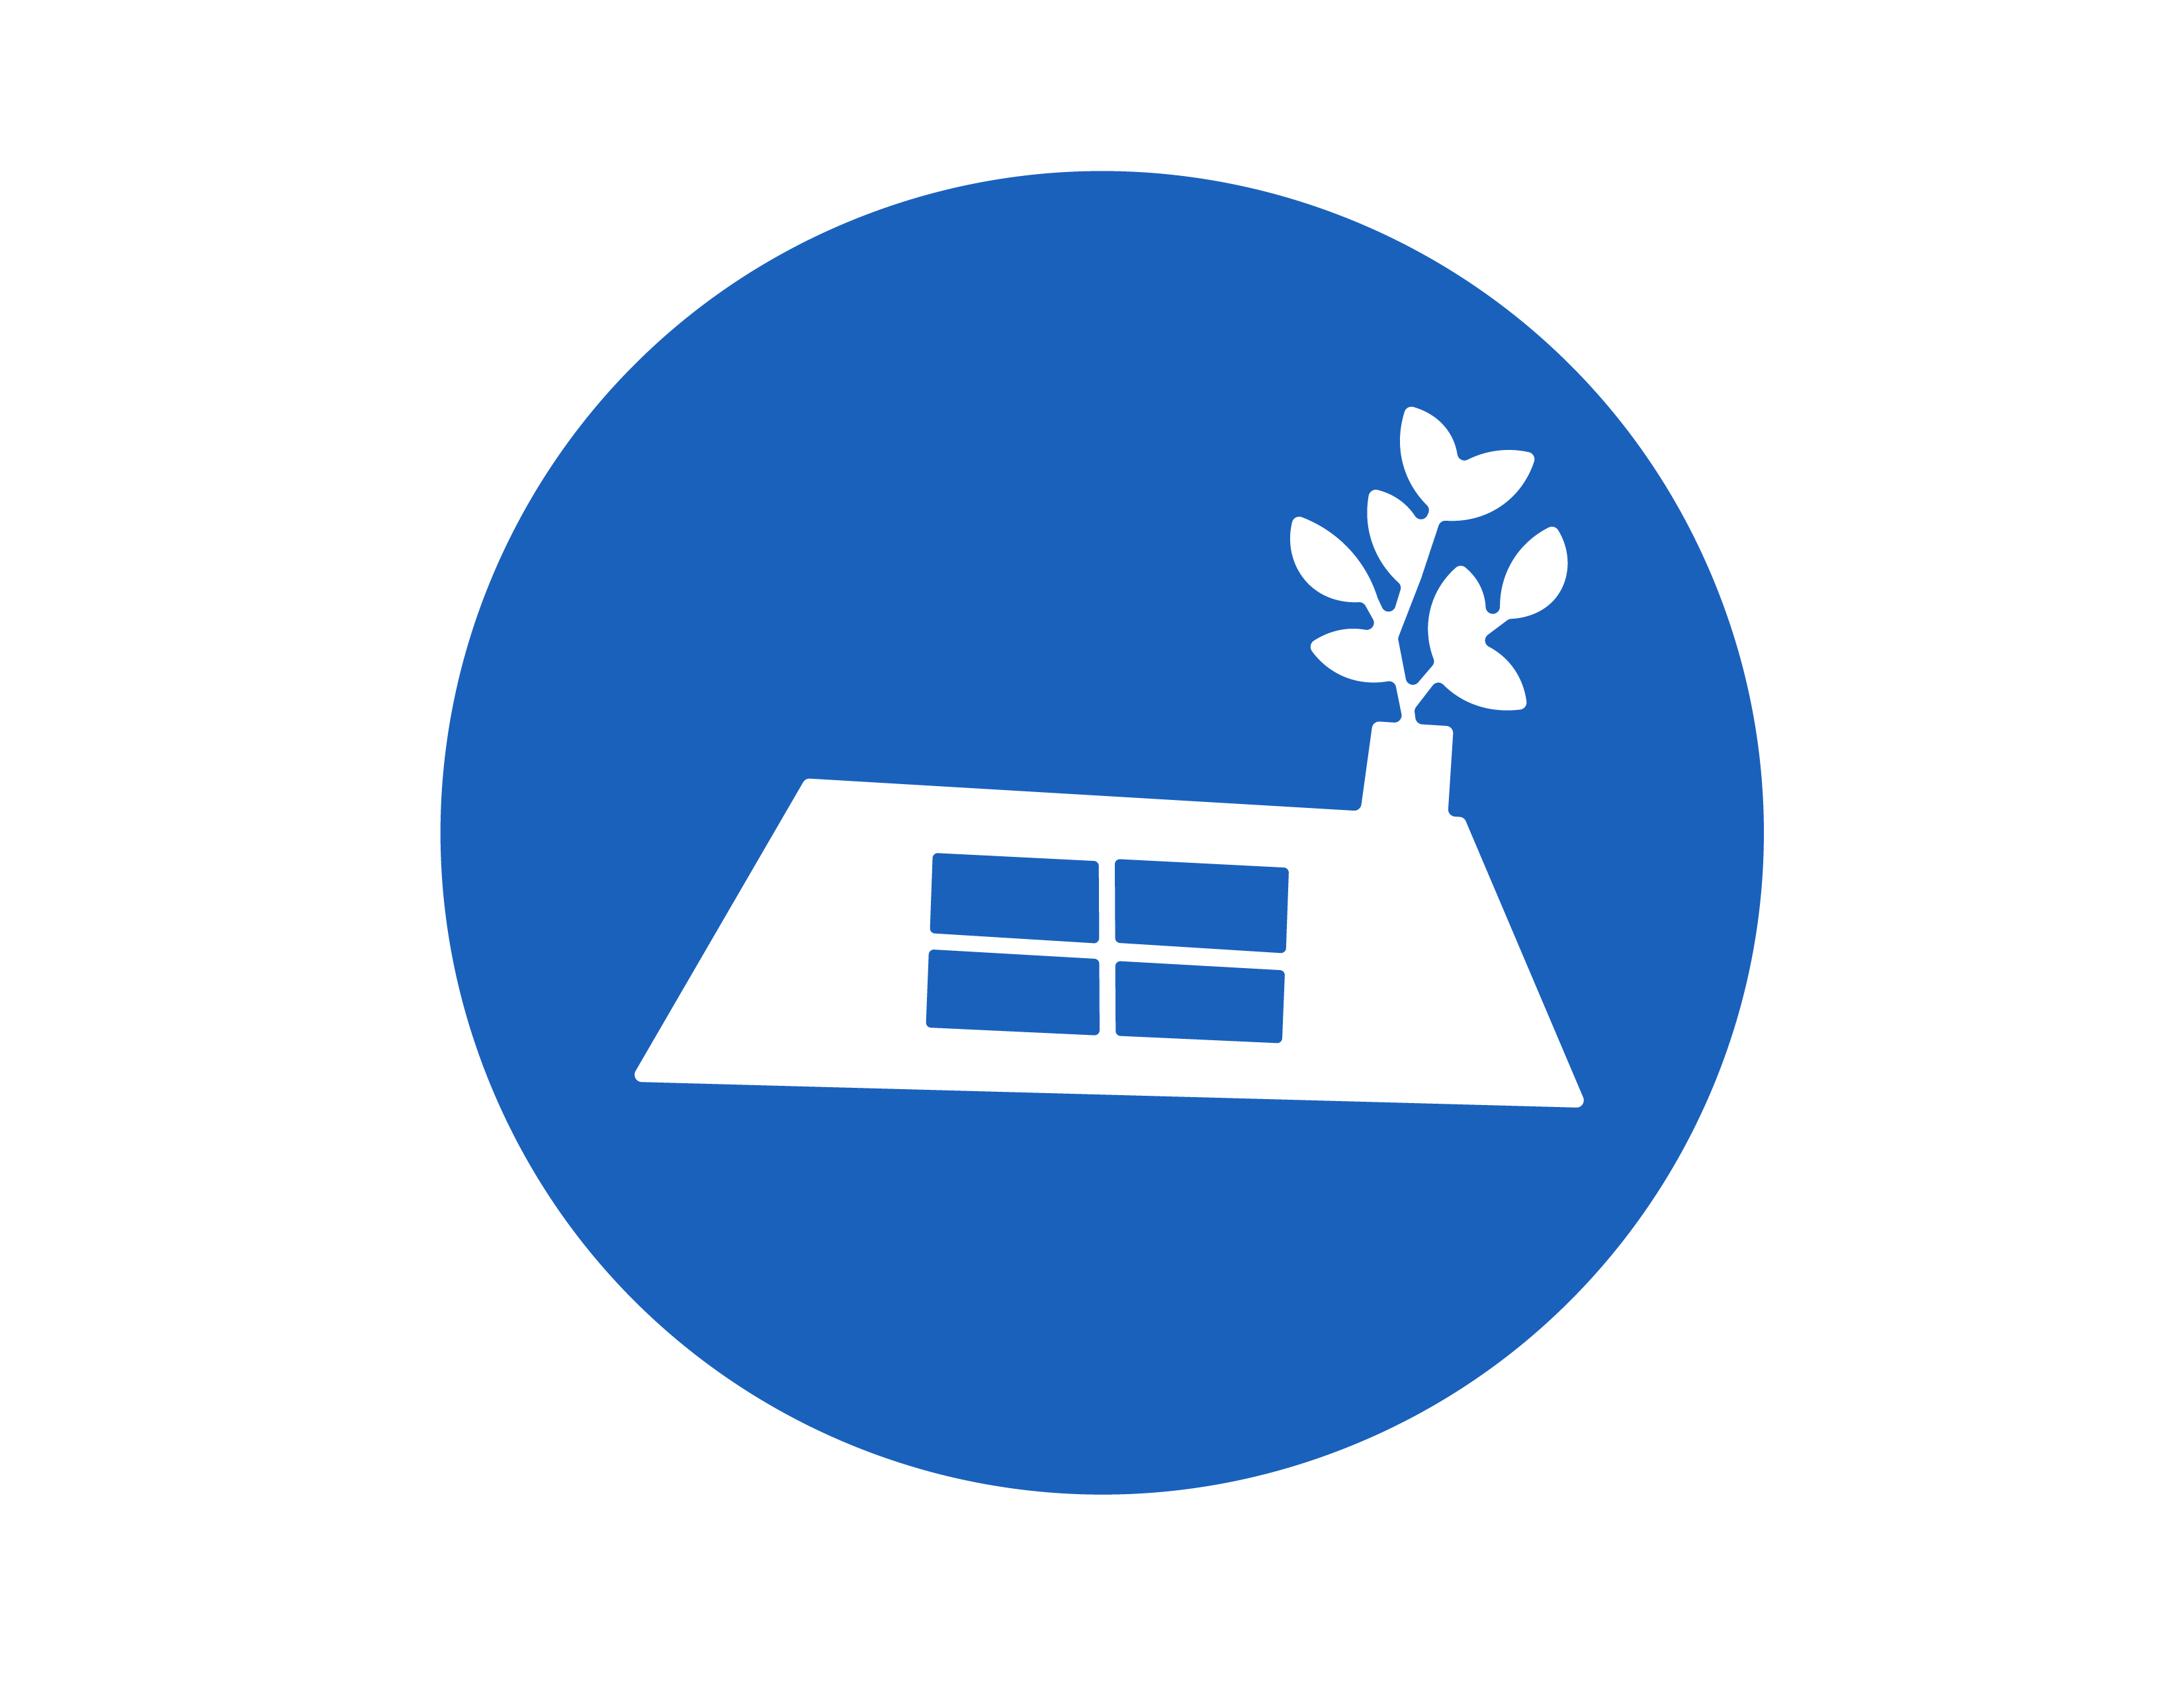 Secondary logo which is a blue circle with the outline of a white house with the chimney and plant coming out of it.